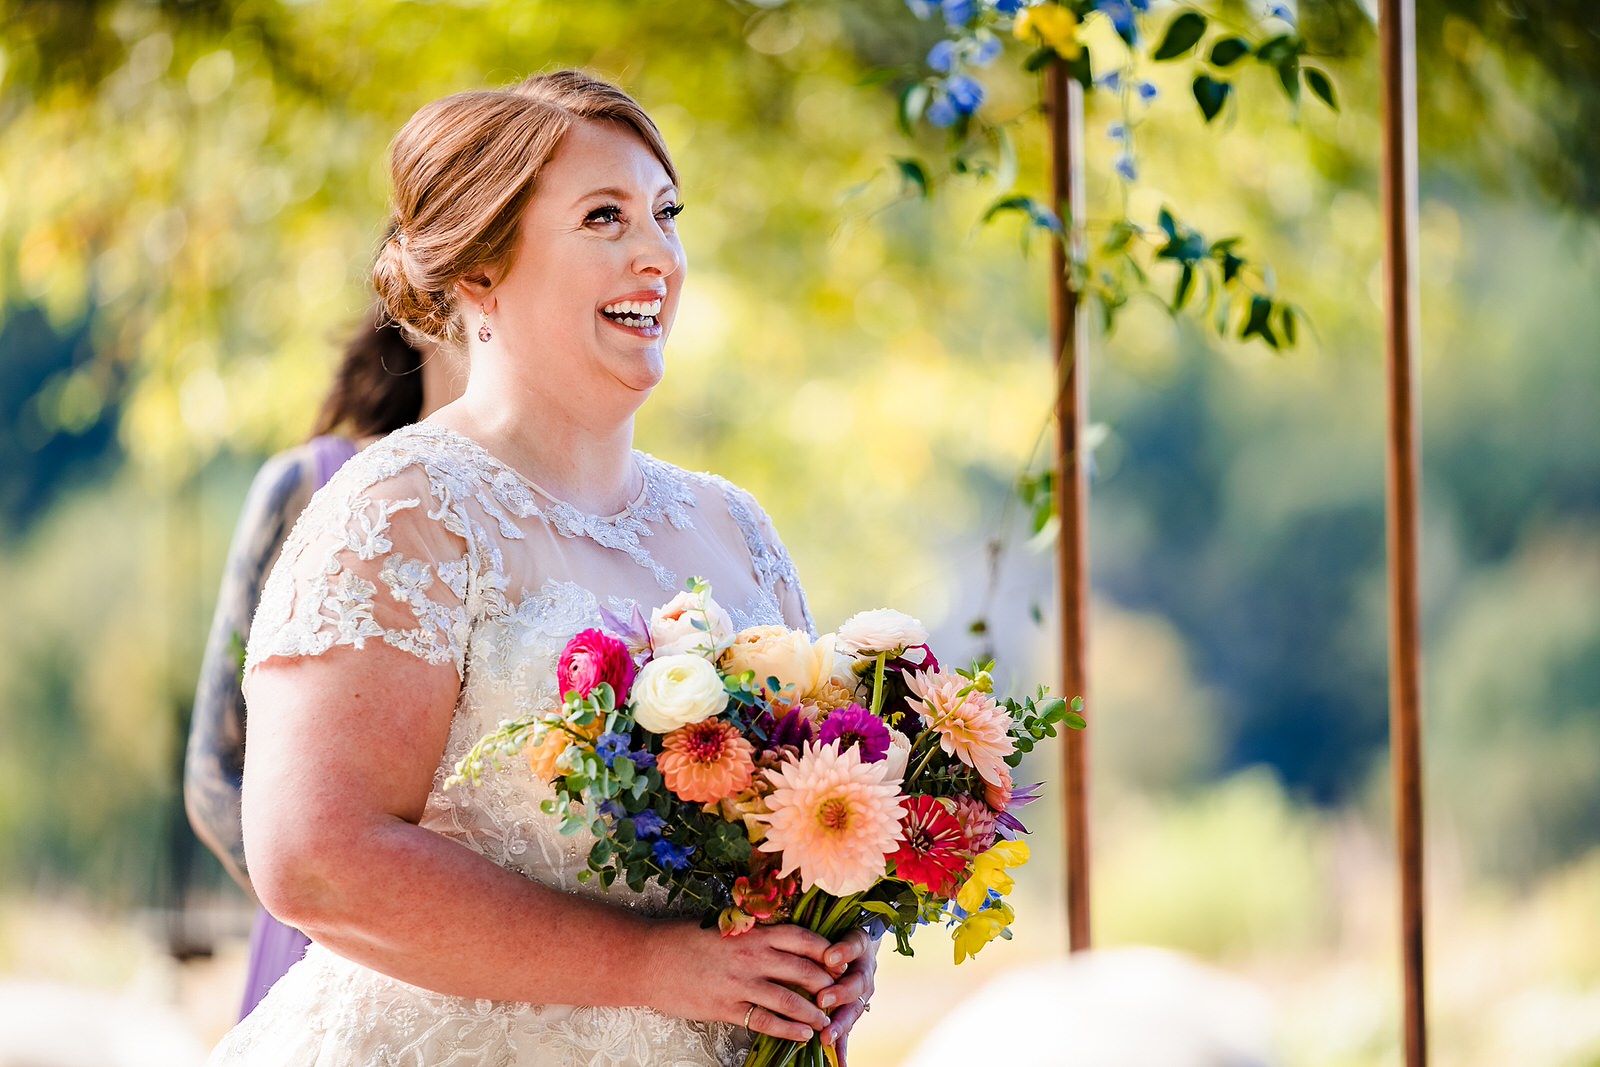 Bride laughs to fight back tears at this emotional wedding ceremony